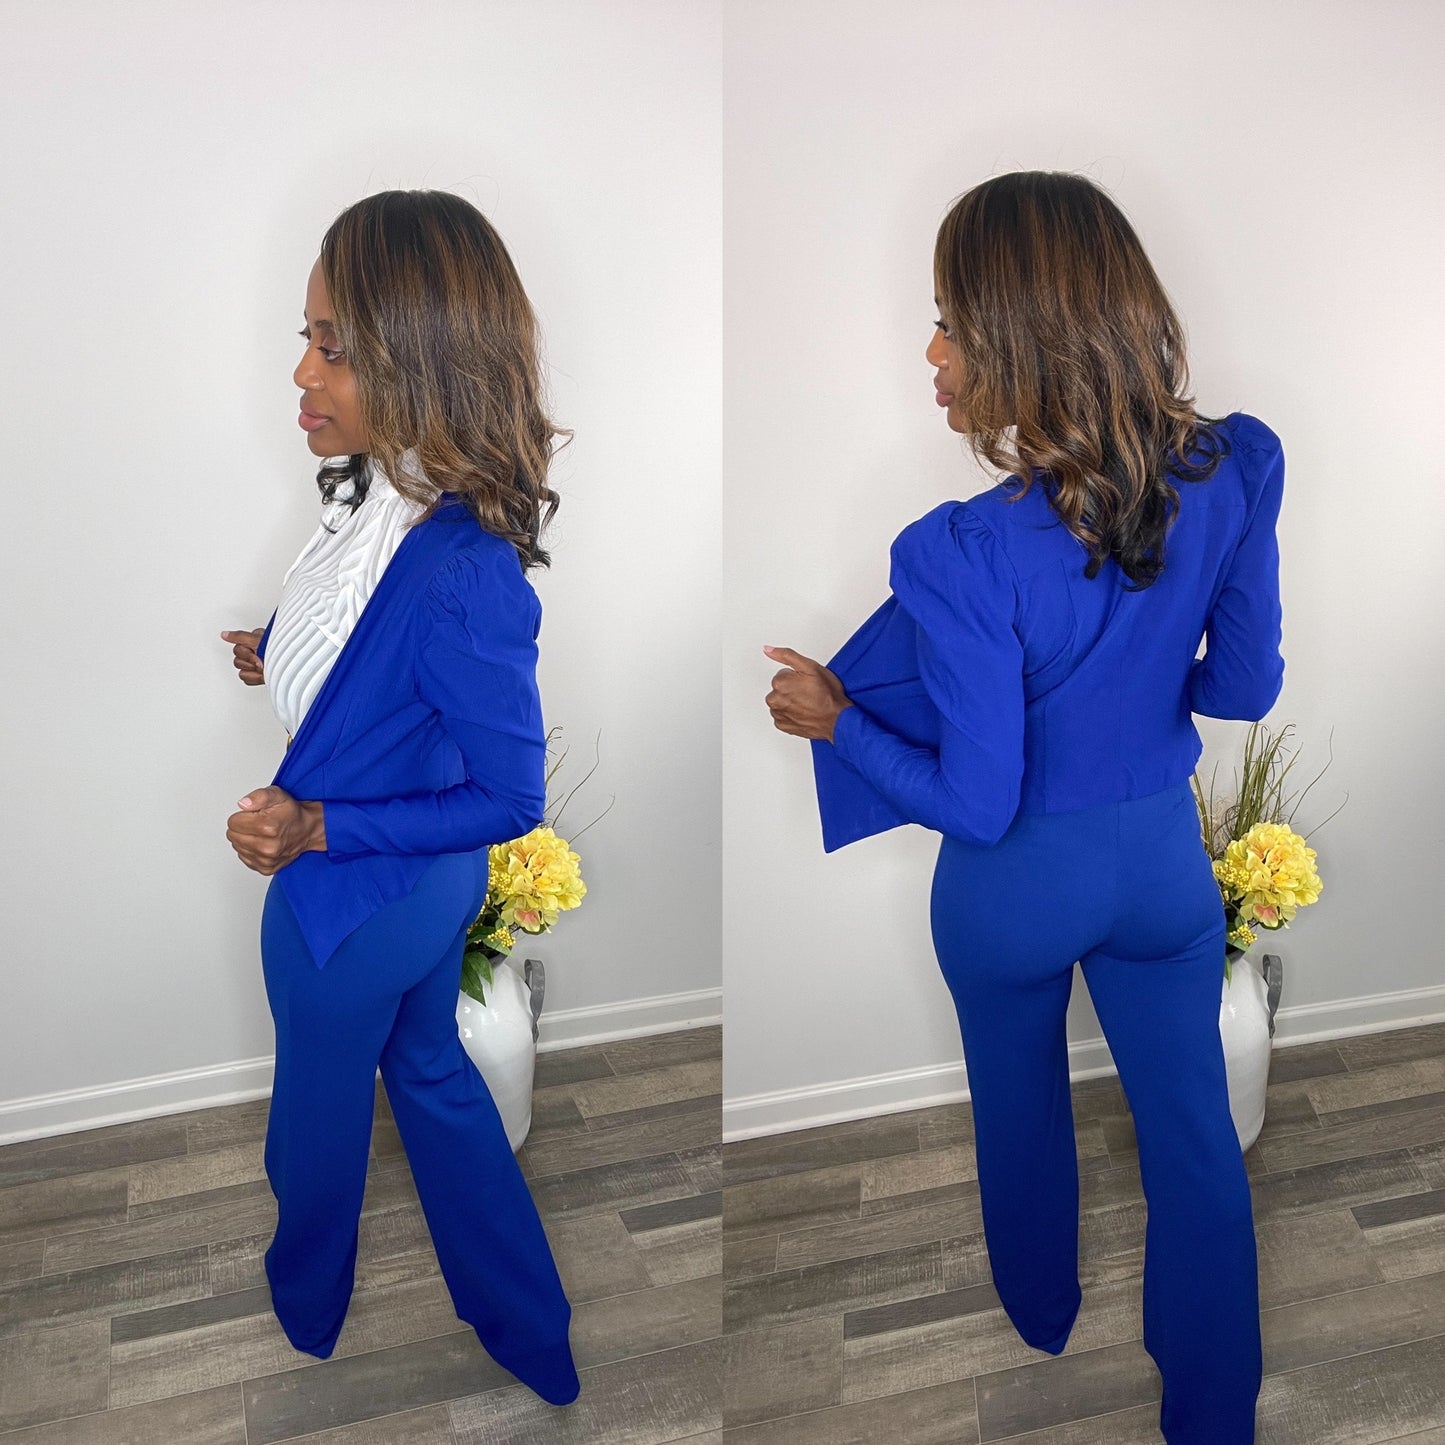 Forever Galore wearing a royal blue fashion work suit great for work and church with Shoe Dazzle shoes